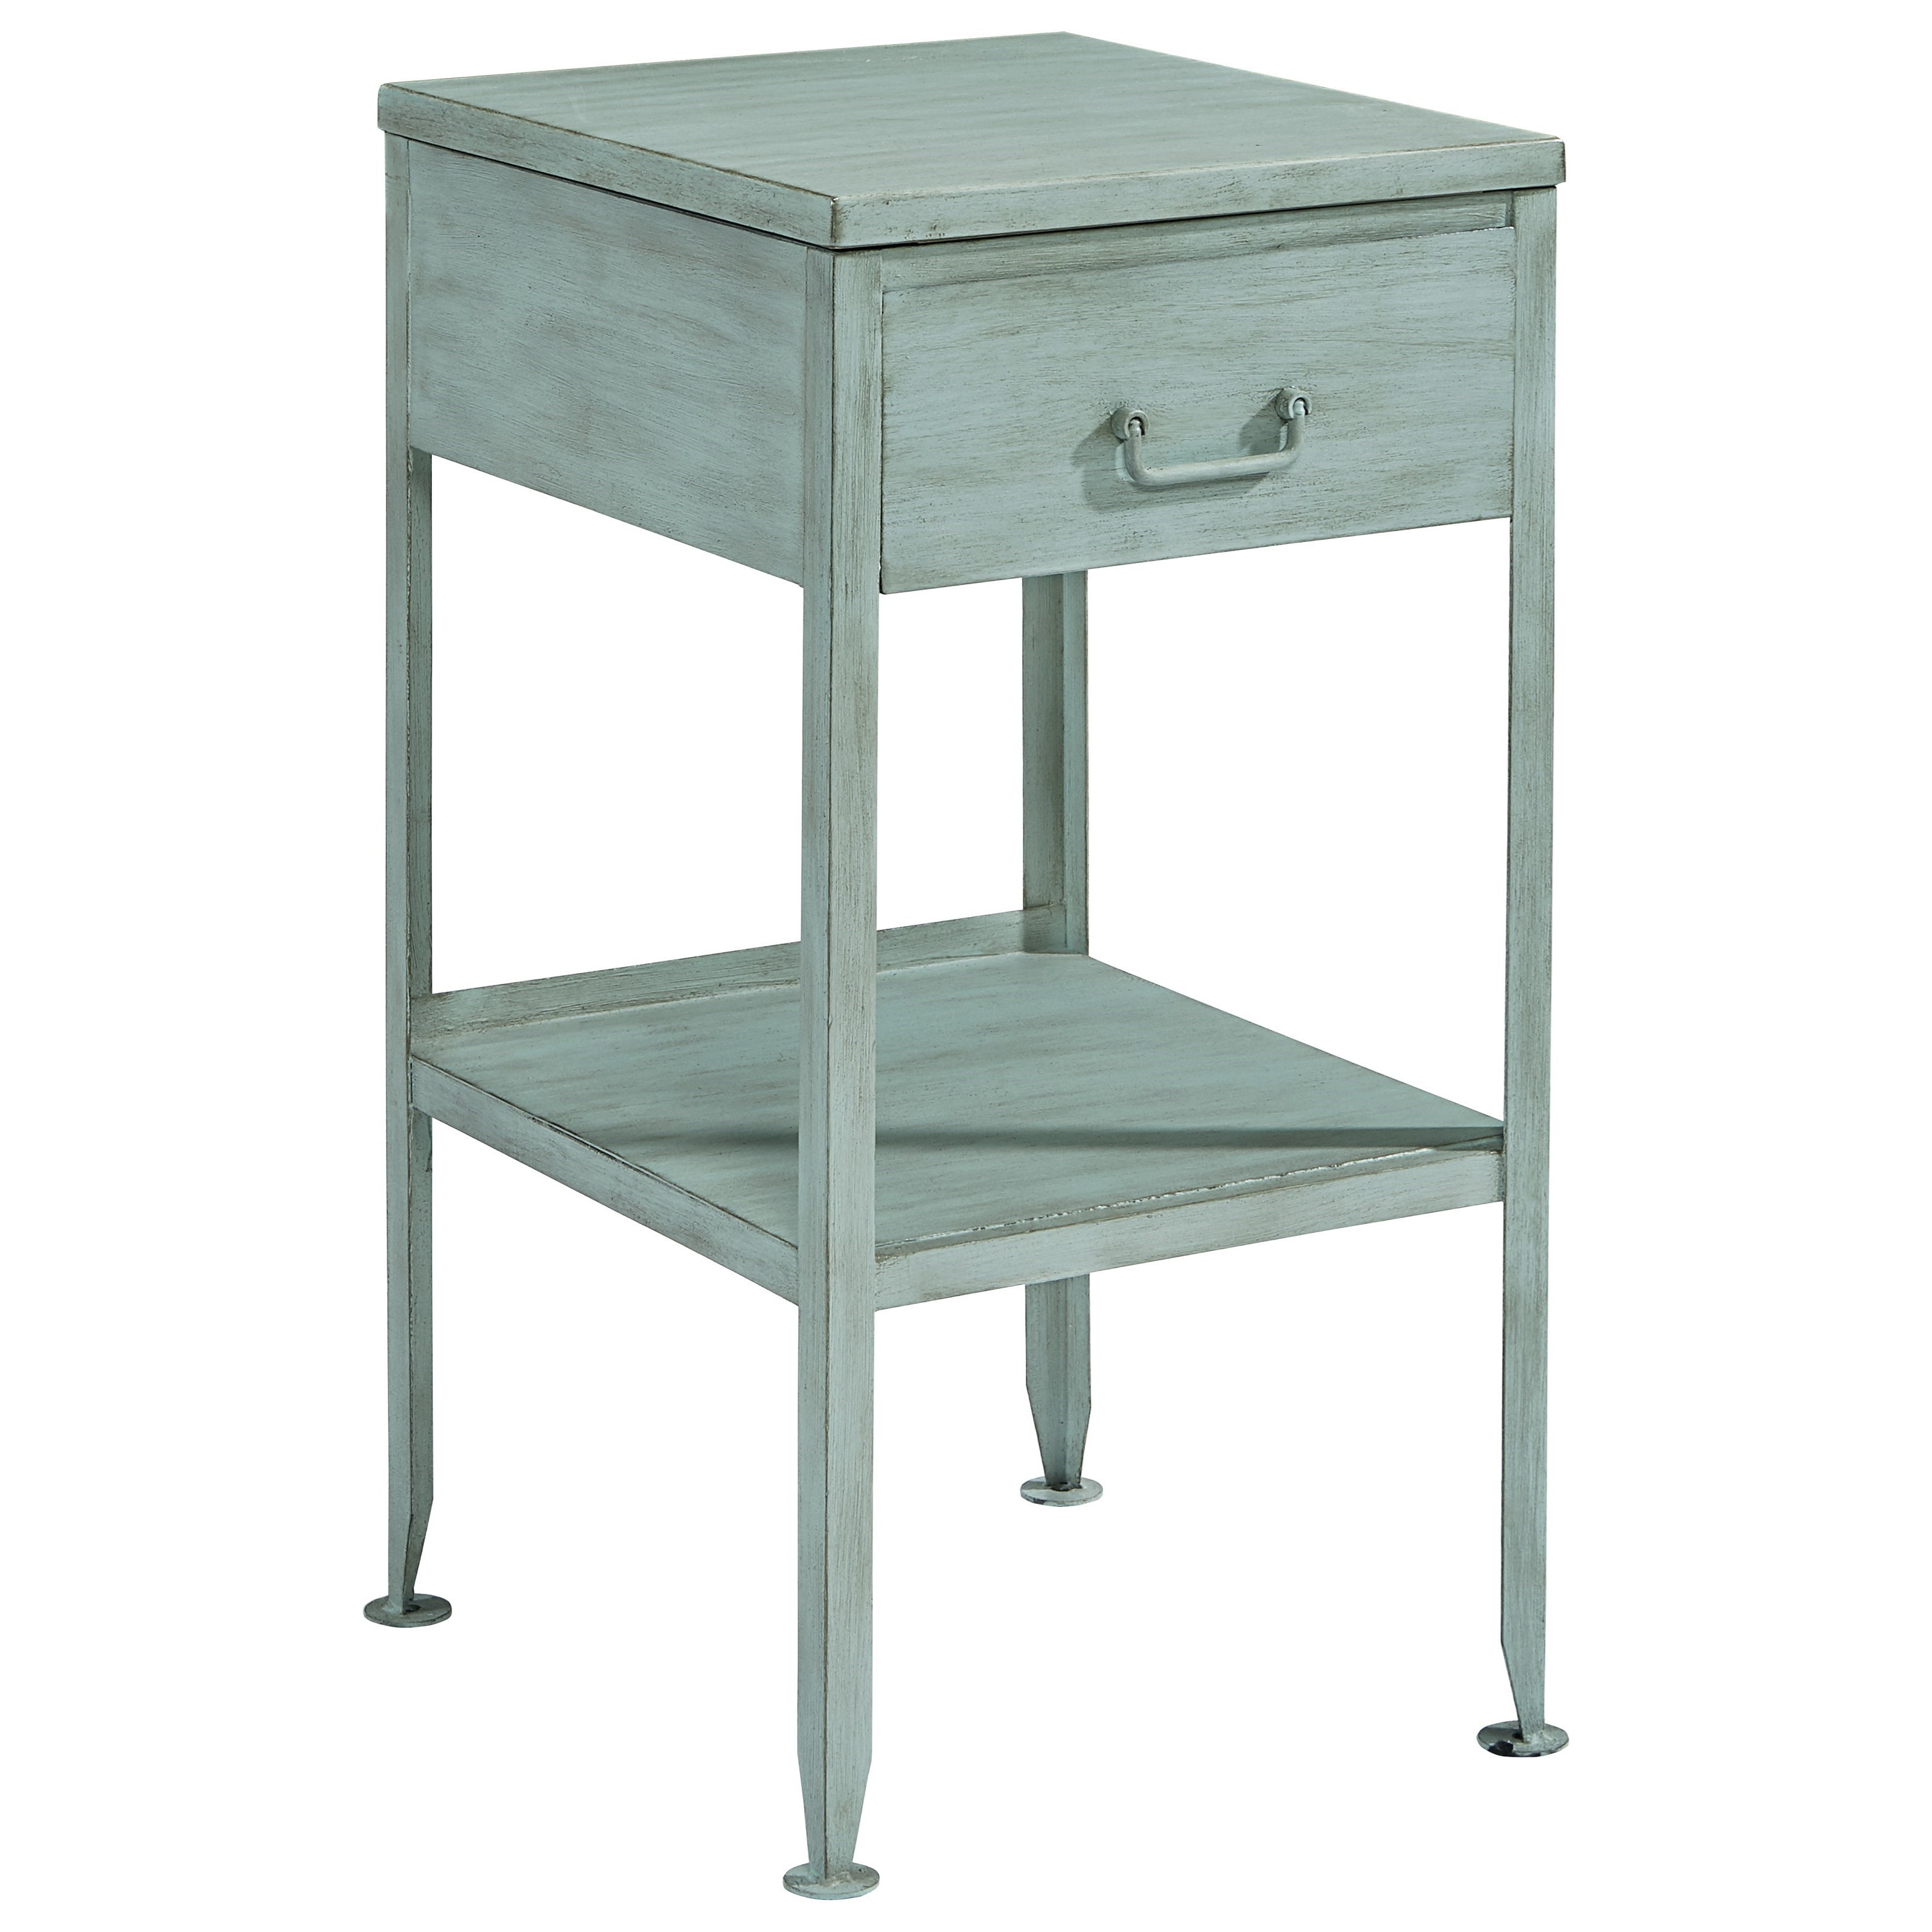 magnolia home joanna gaines accent elements small metal end table products color aqua blue side outside patio set chair cushions room essentials office computer desk printed